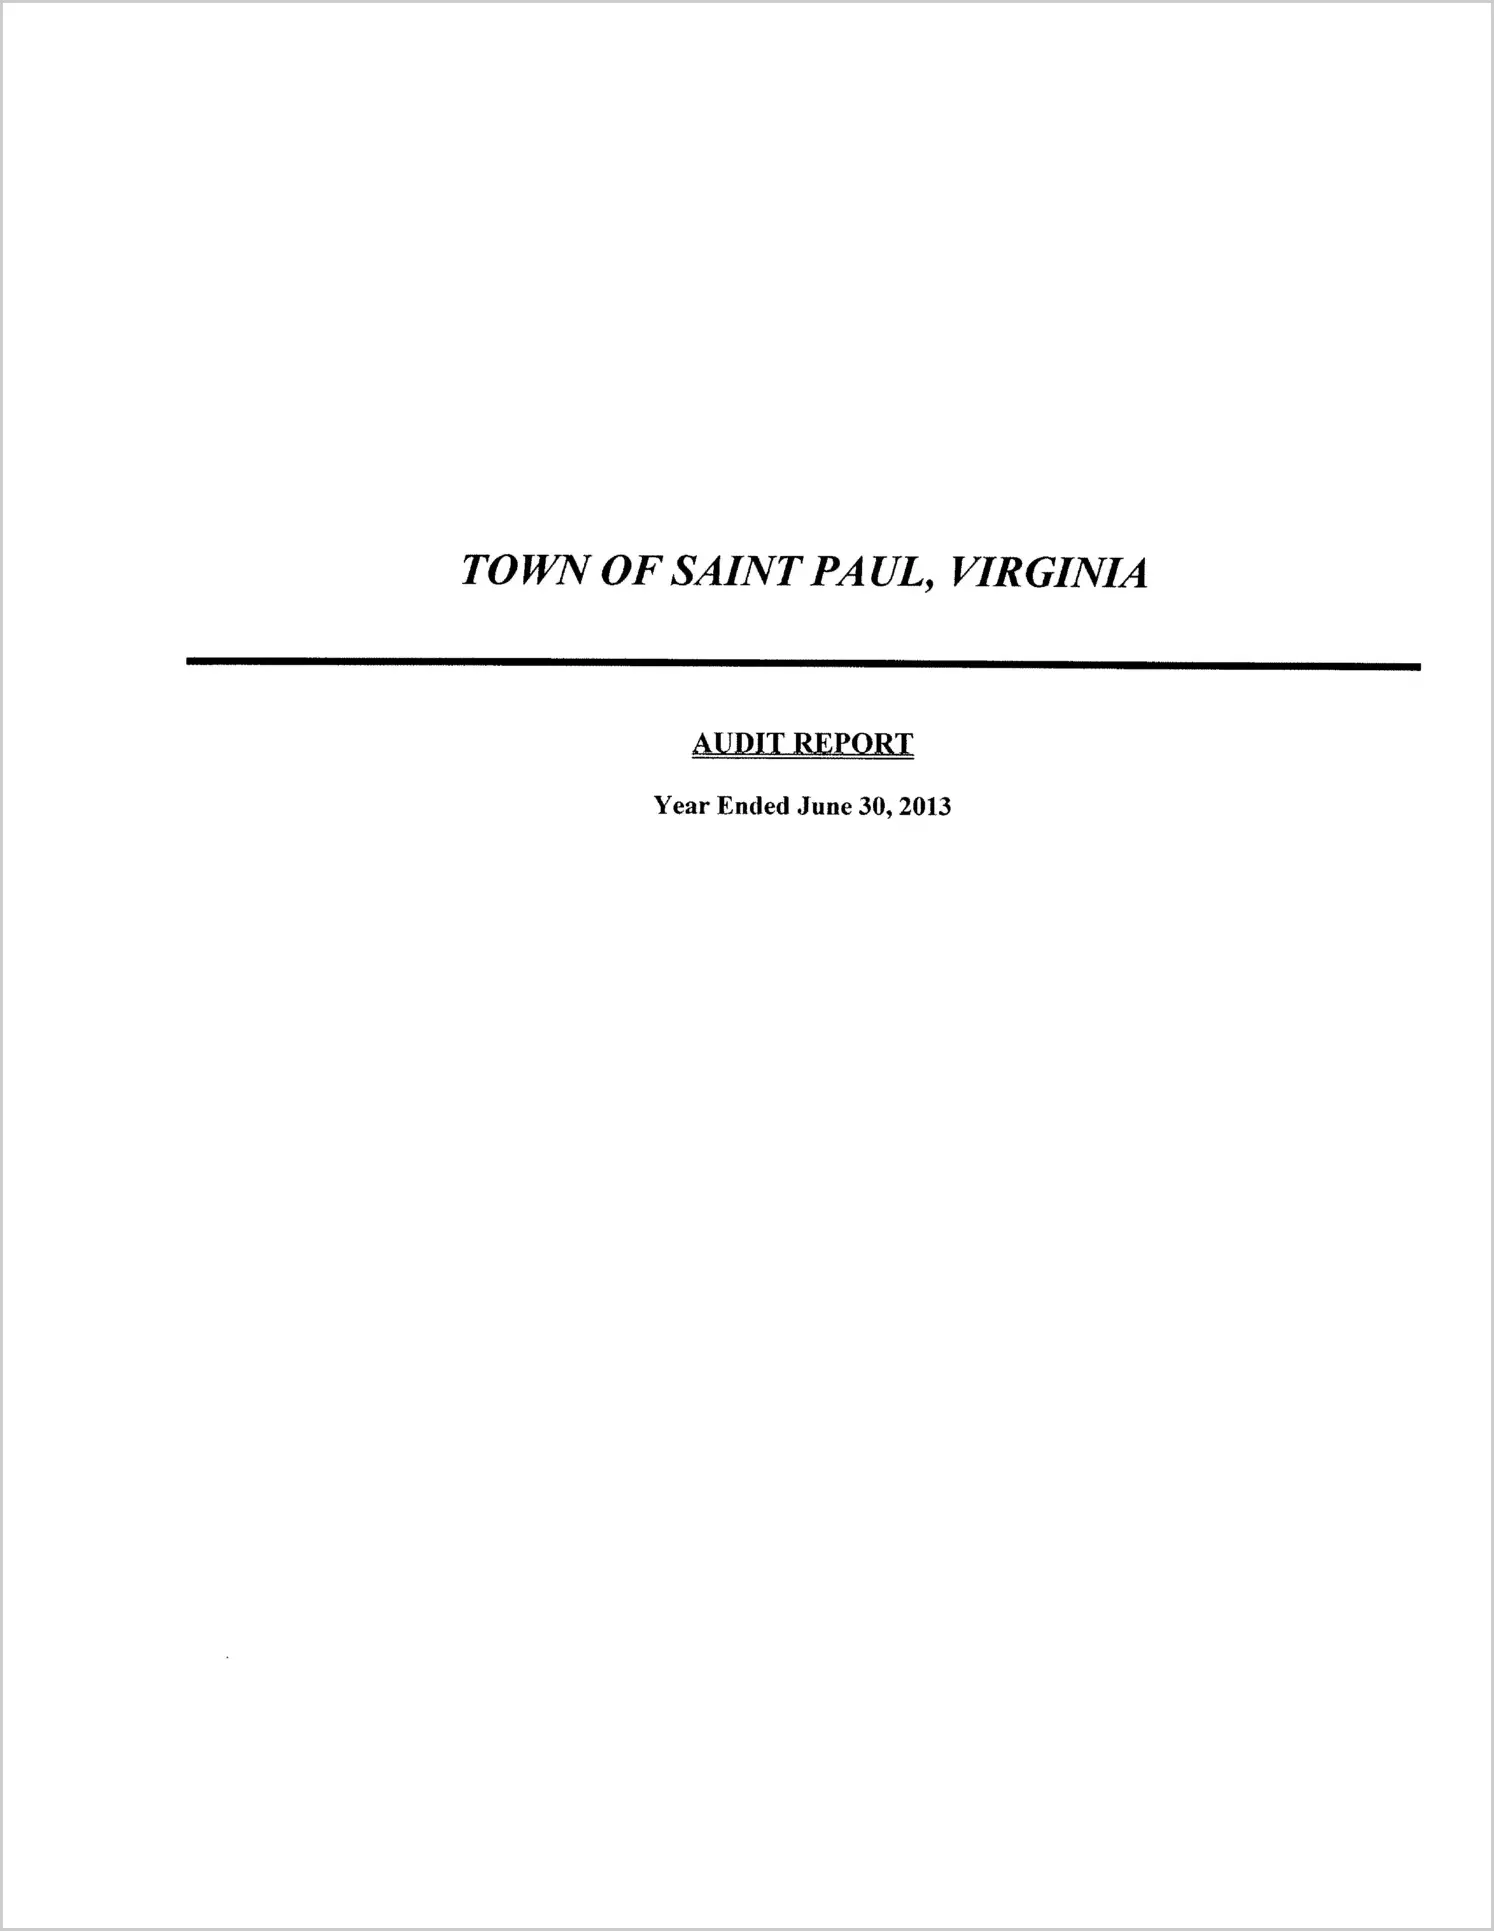 2013 Annual Financial Report for Town of Saint Paul